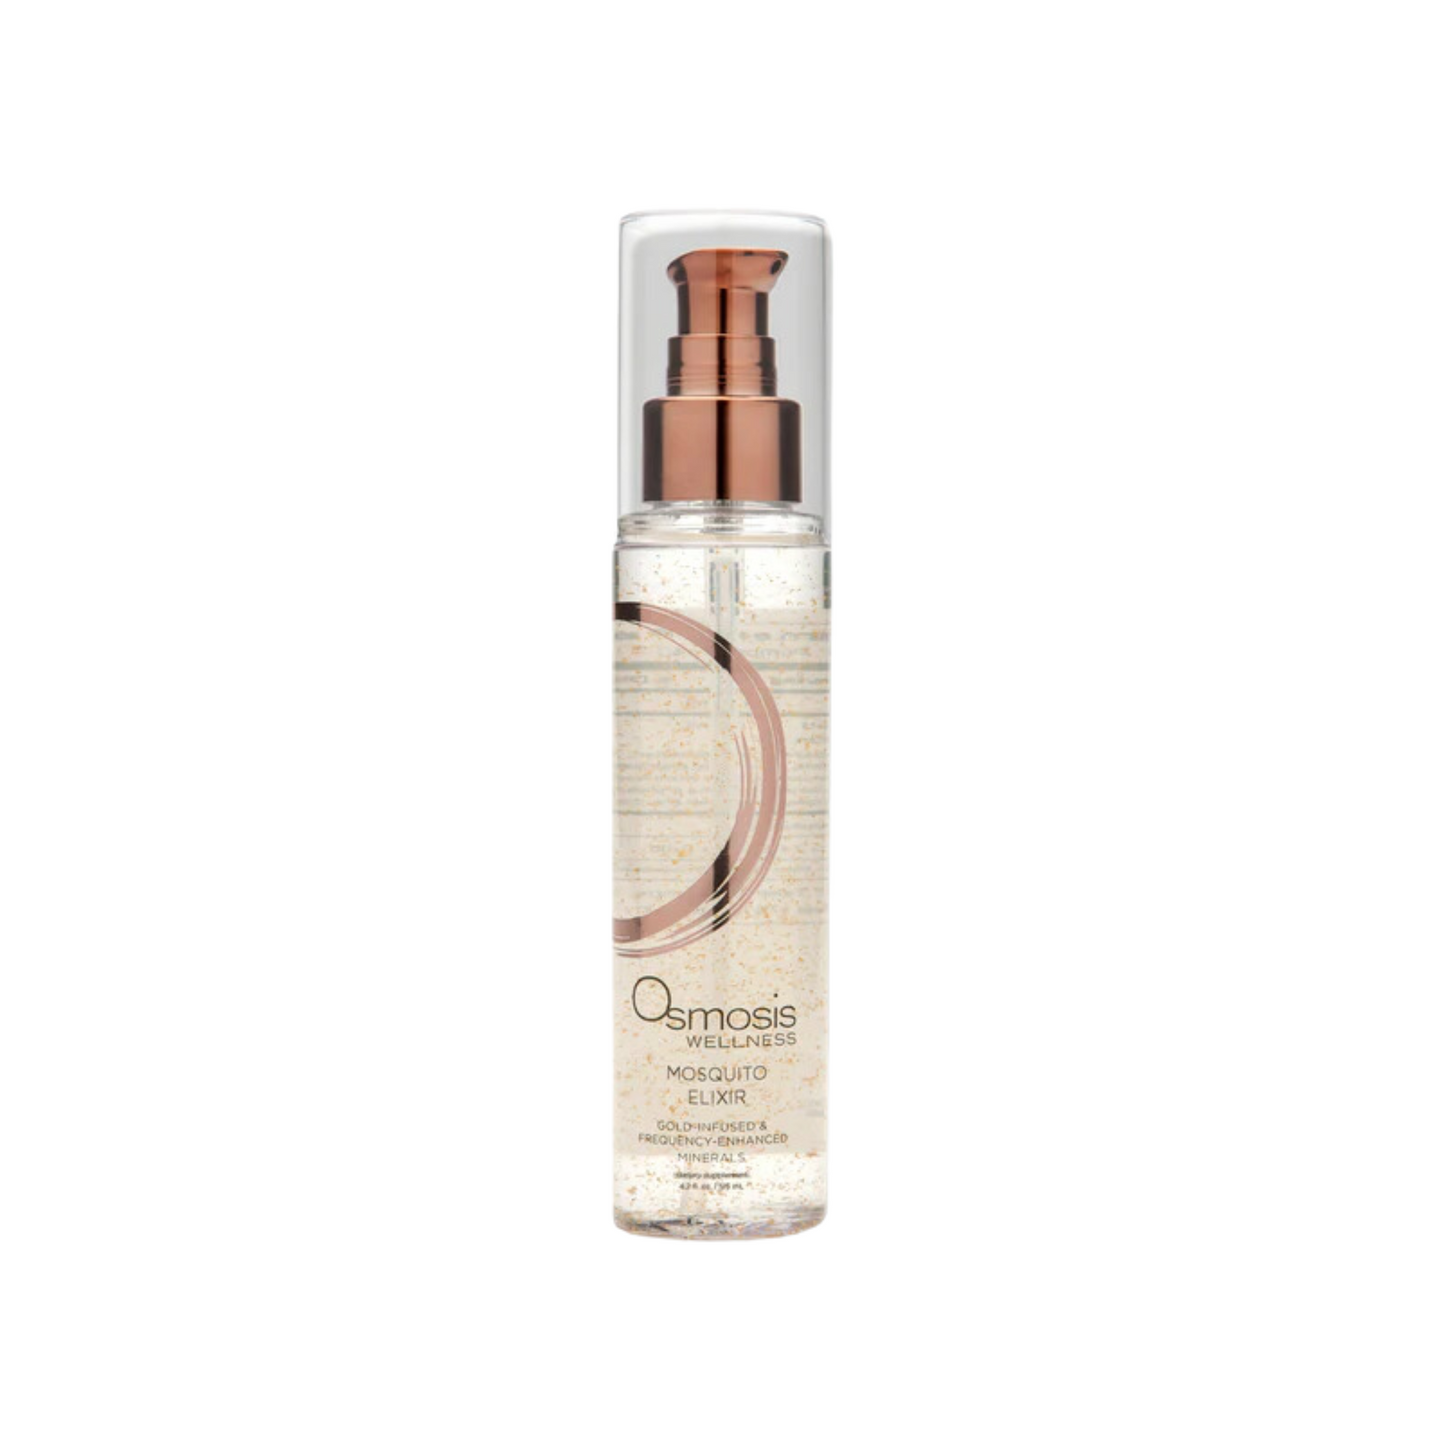 Mosquito Elixir by Osmosis Beauty